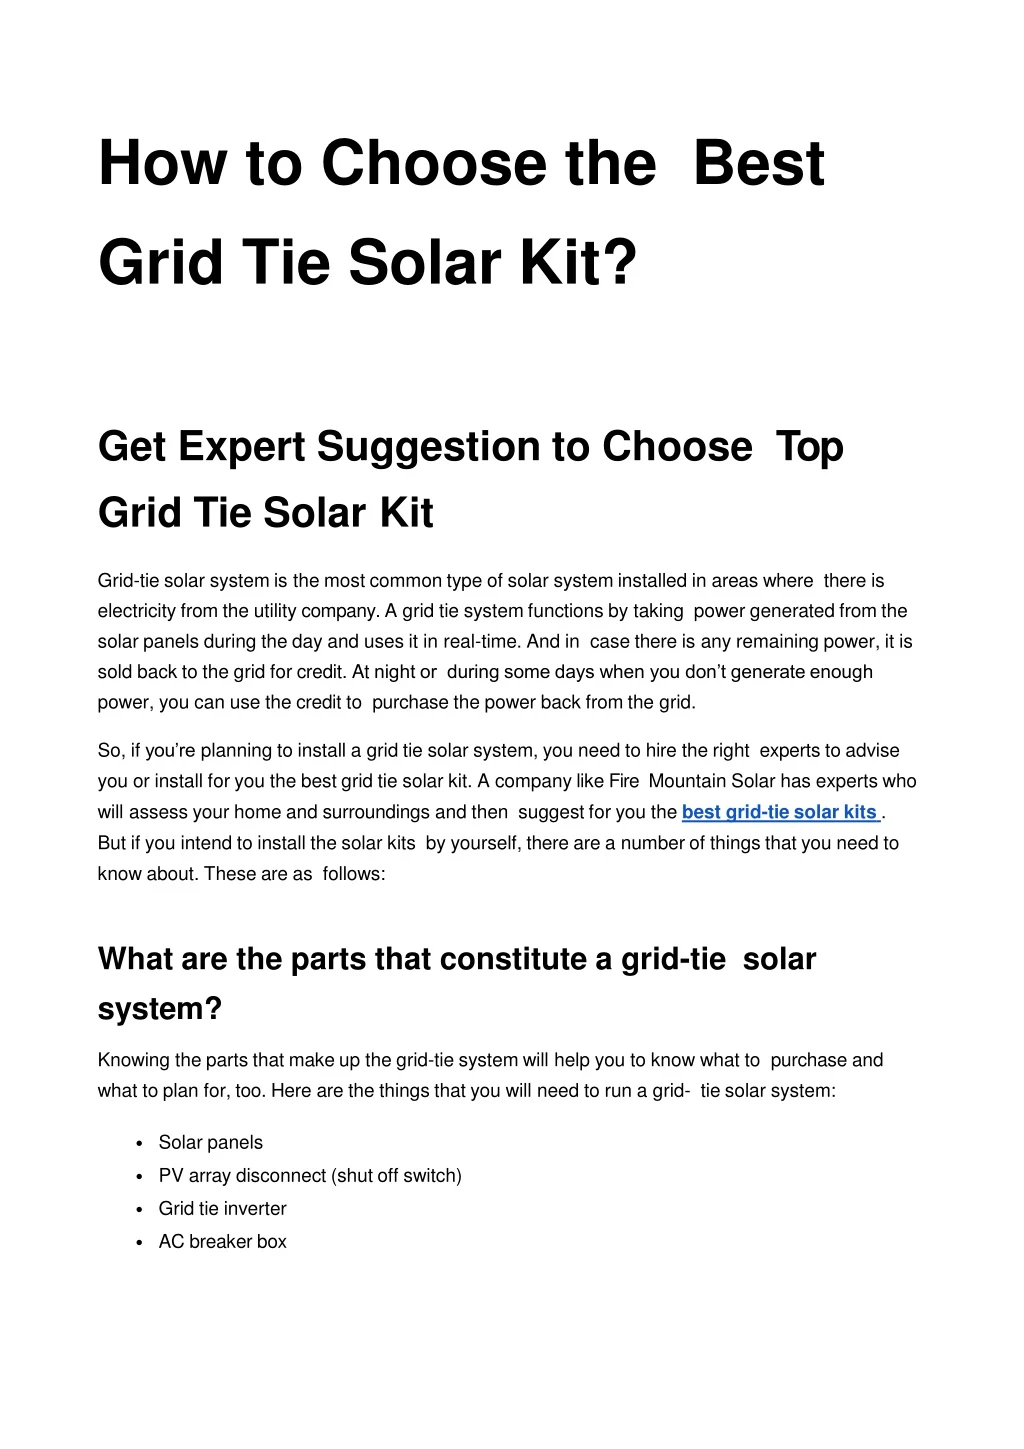 how to choose the best grid tie solar kit